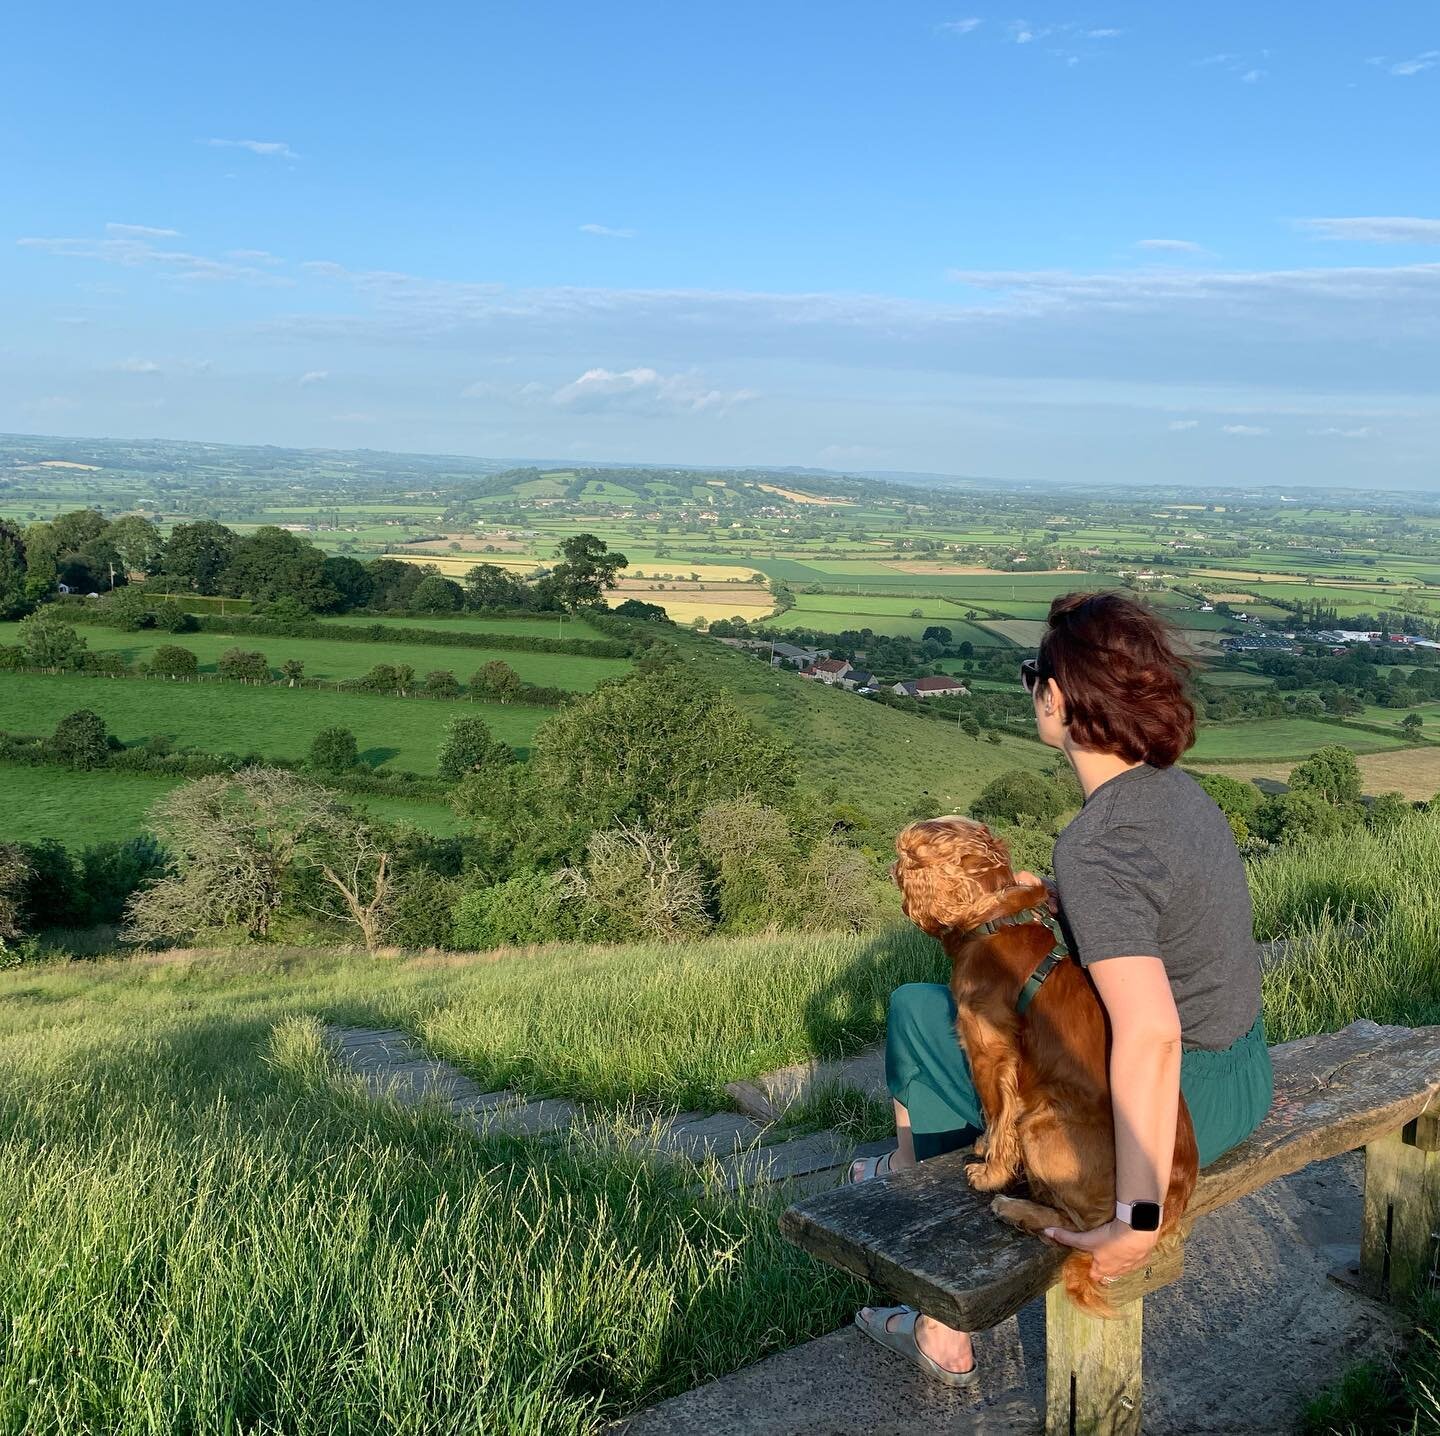 Just me &amp; my pal taking in the view over Somerset&hellip;the top of the Tor is wild &amp; windy &amp; so wonderfully cleansing.
.
#tor #somerset #glastonburytor #glastonbury #rechargingmysoul #refillyourcup #justbe #sunshine #wind #freedom